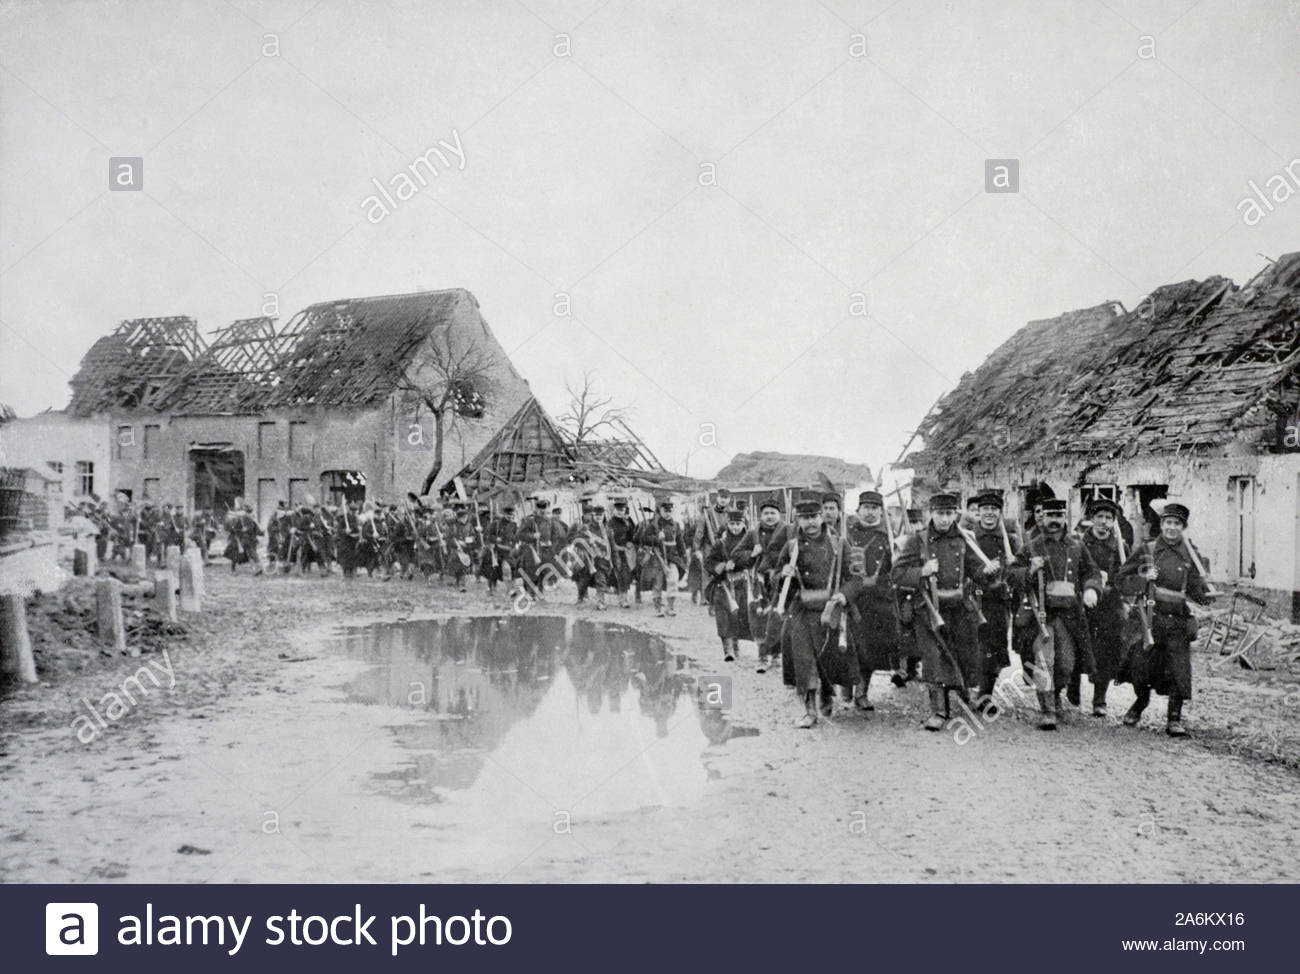 WW1 Belgian soldiers on their way to the trenches, vintage photograph from 1914 Stock Photo